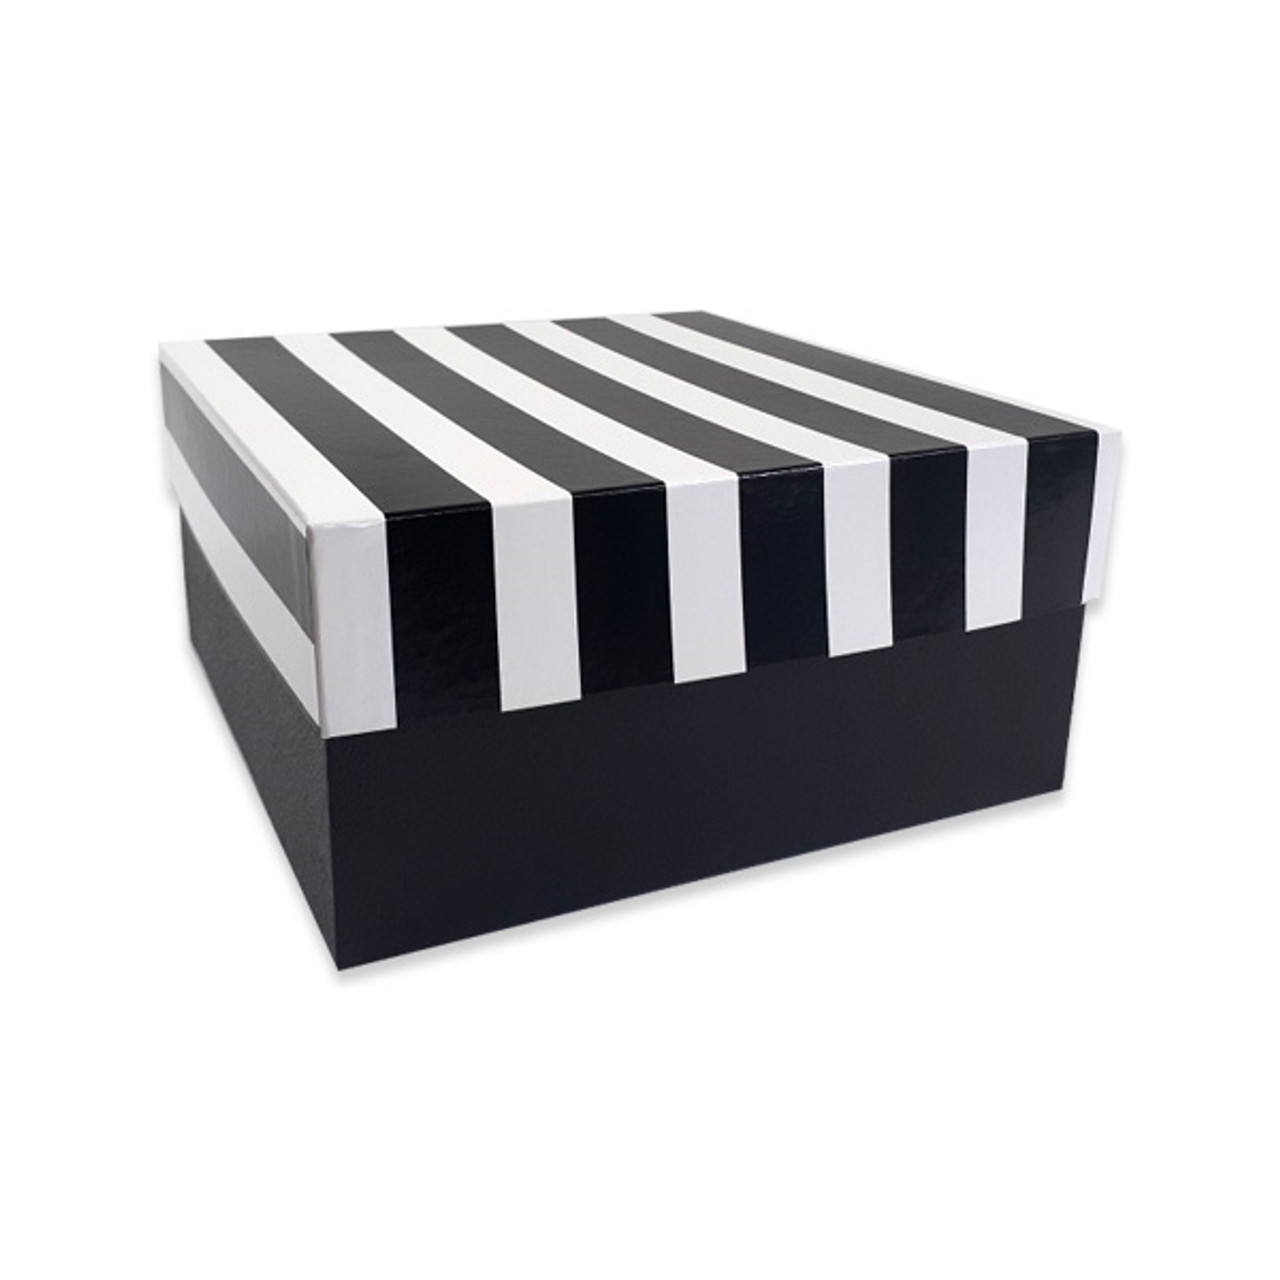 9 Black White Stripe Pattern Rigid Set Up Boxes for Curated Gifts